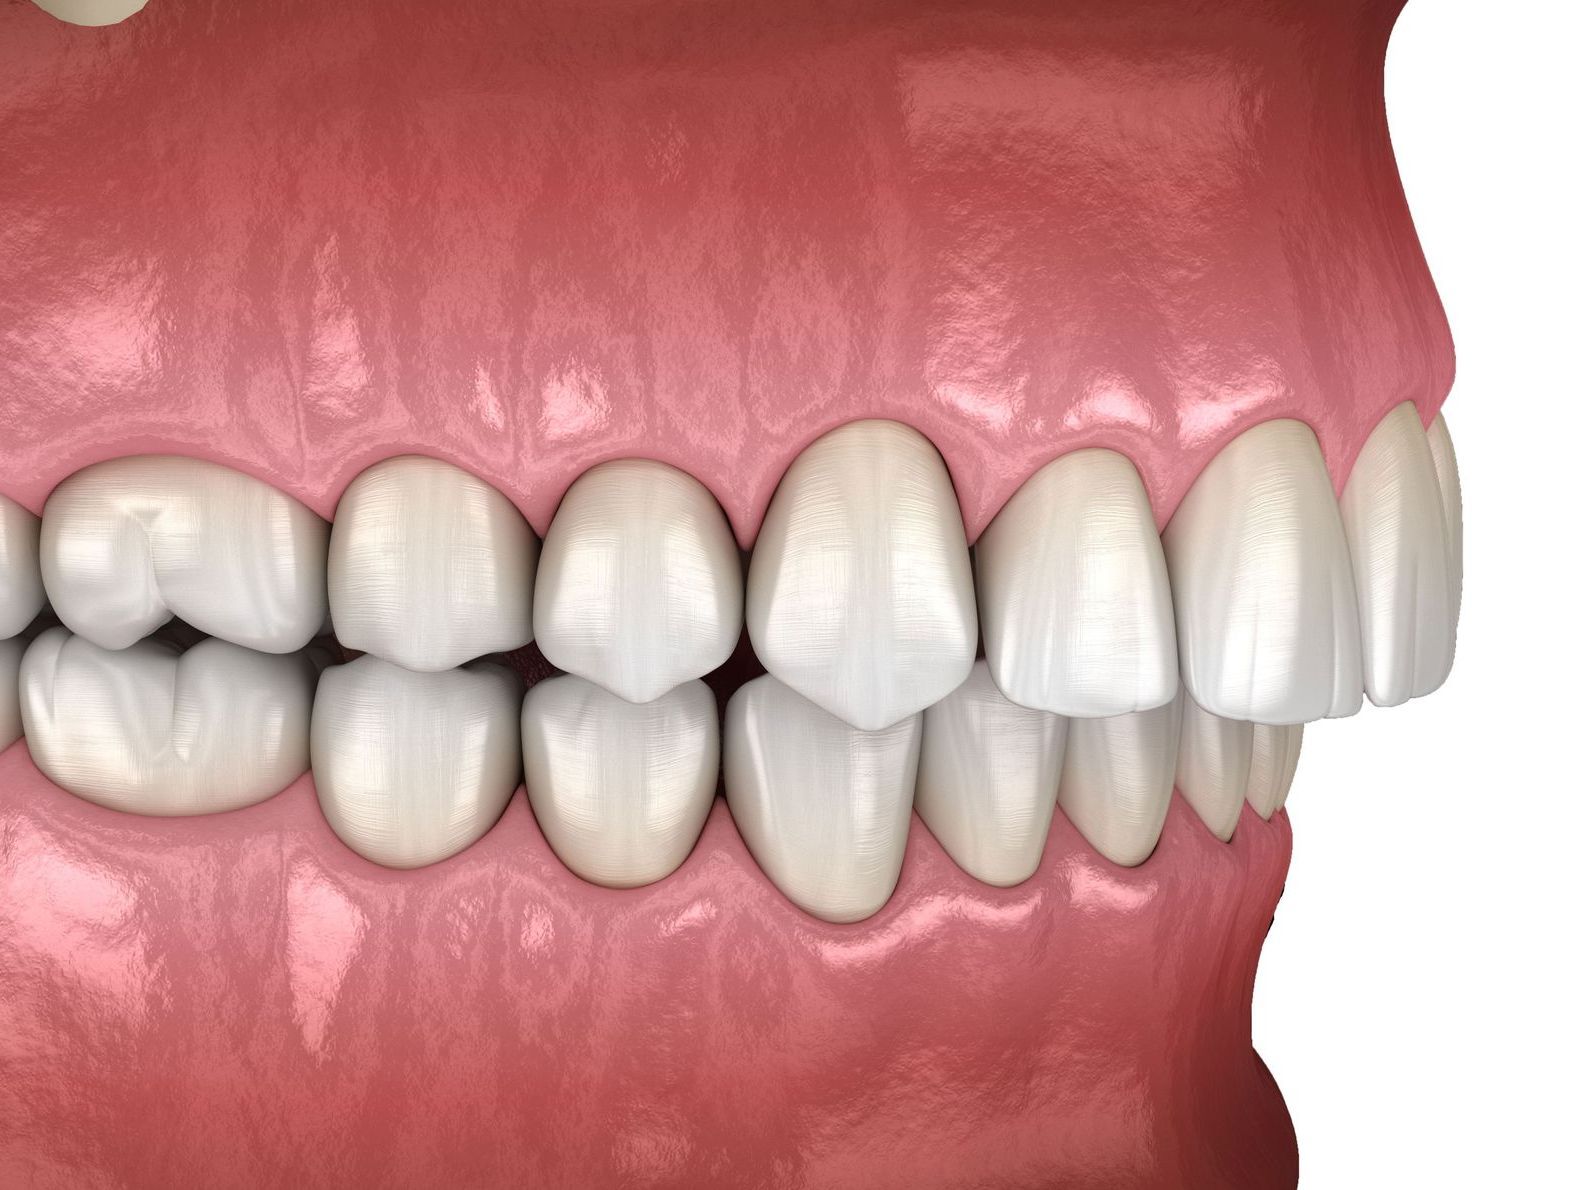 A computer generated image of teeth with an overbite